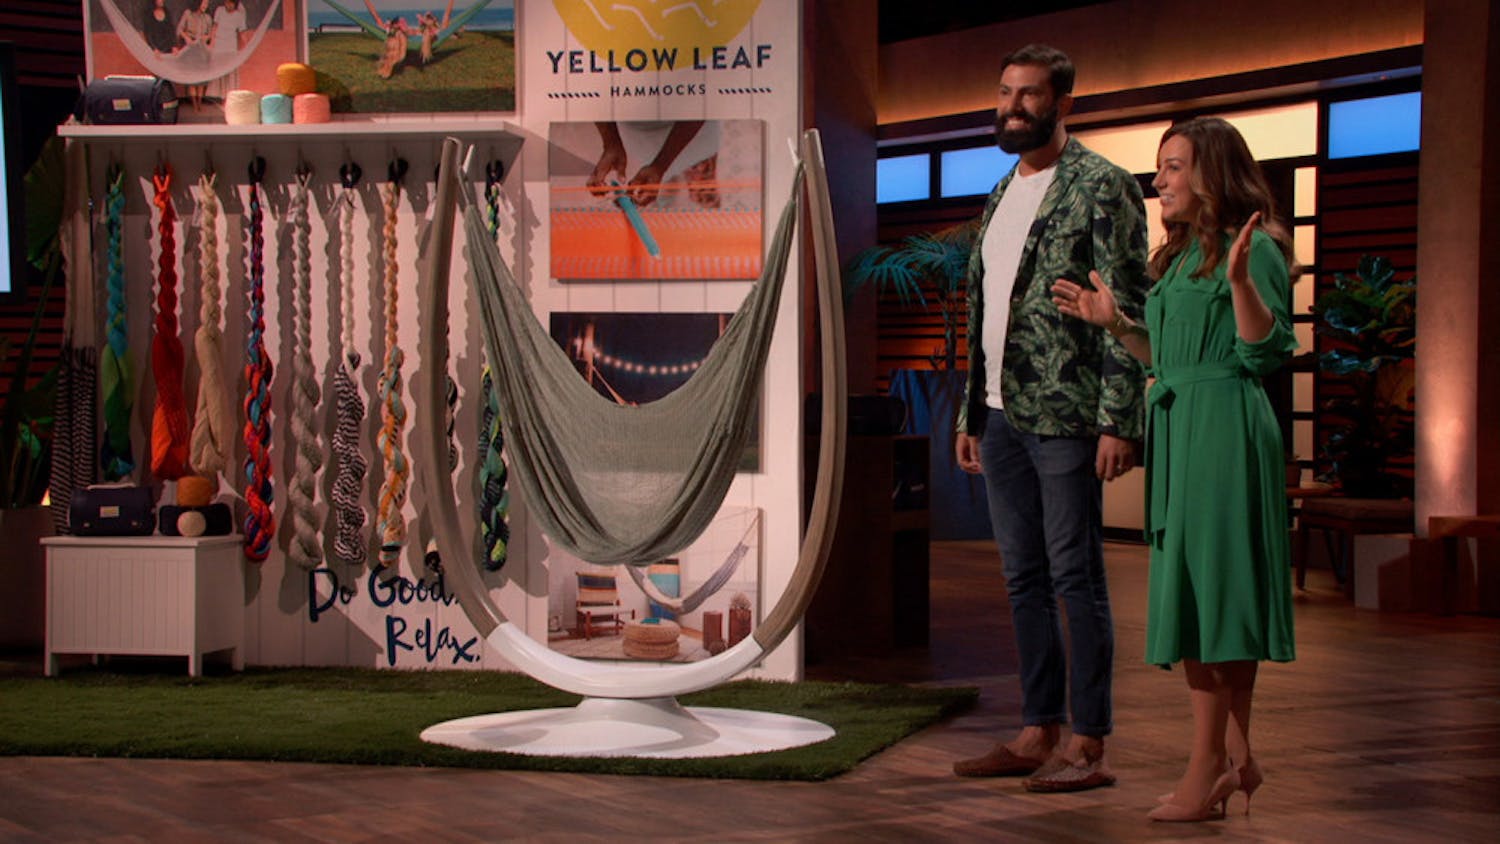 UF alumna Rachel Connors made a $1 million deal on “Shark Tank” for Yellow Leaf Hammocks, a company dedicated to helping women weavers in rural Thailand. 